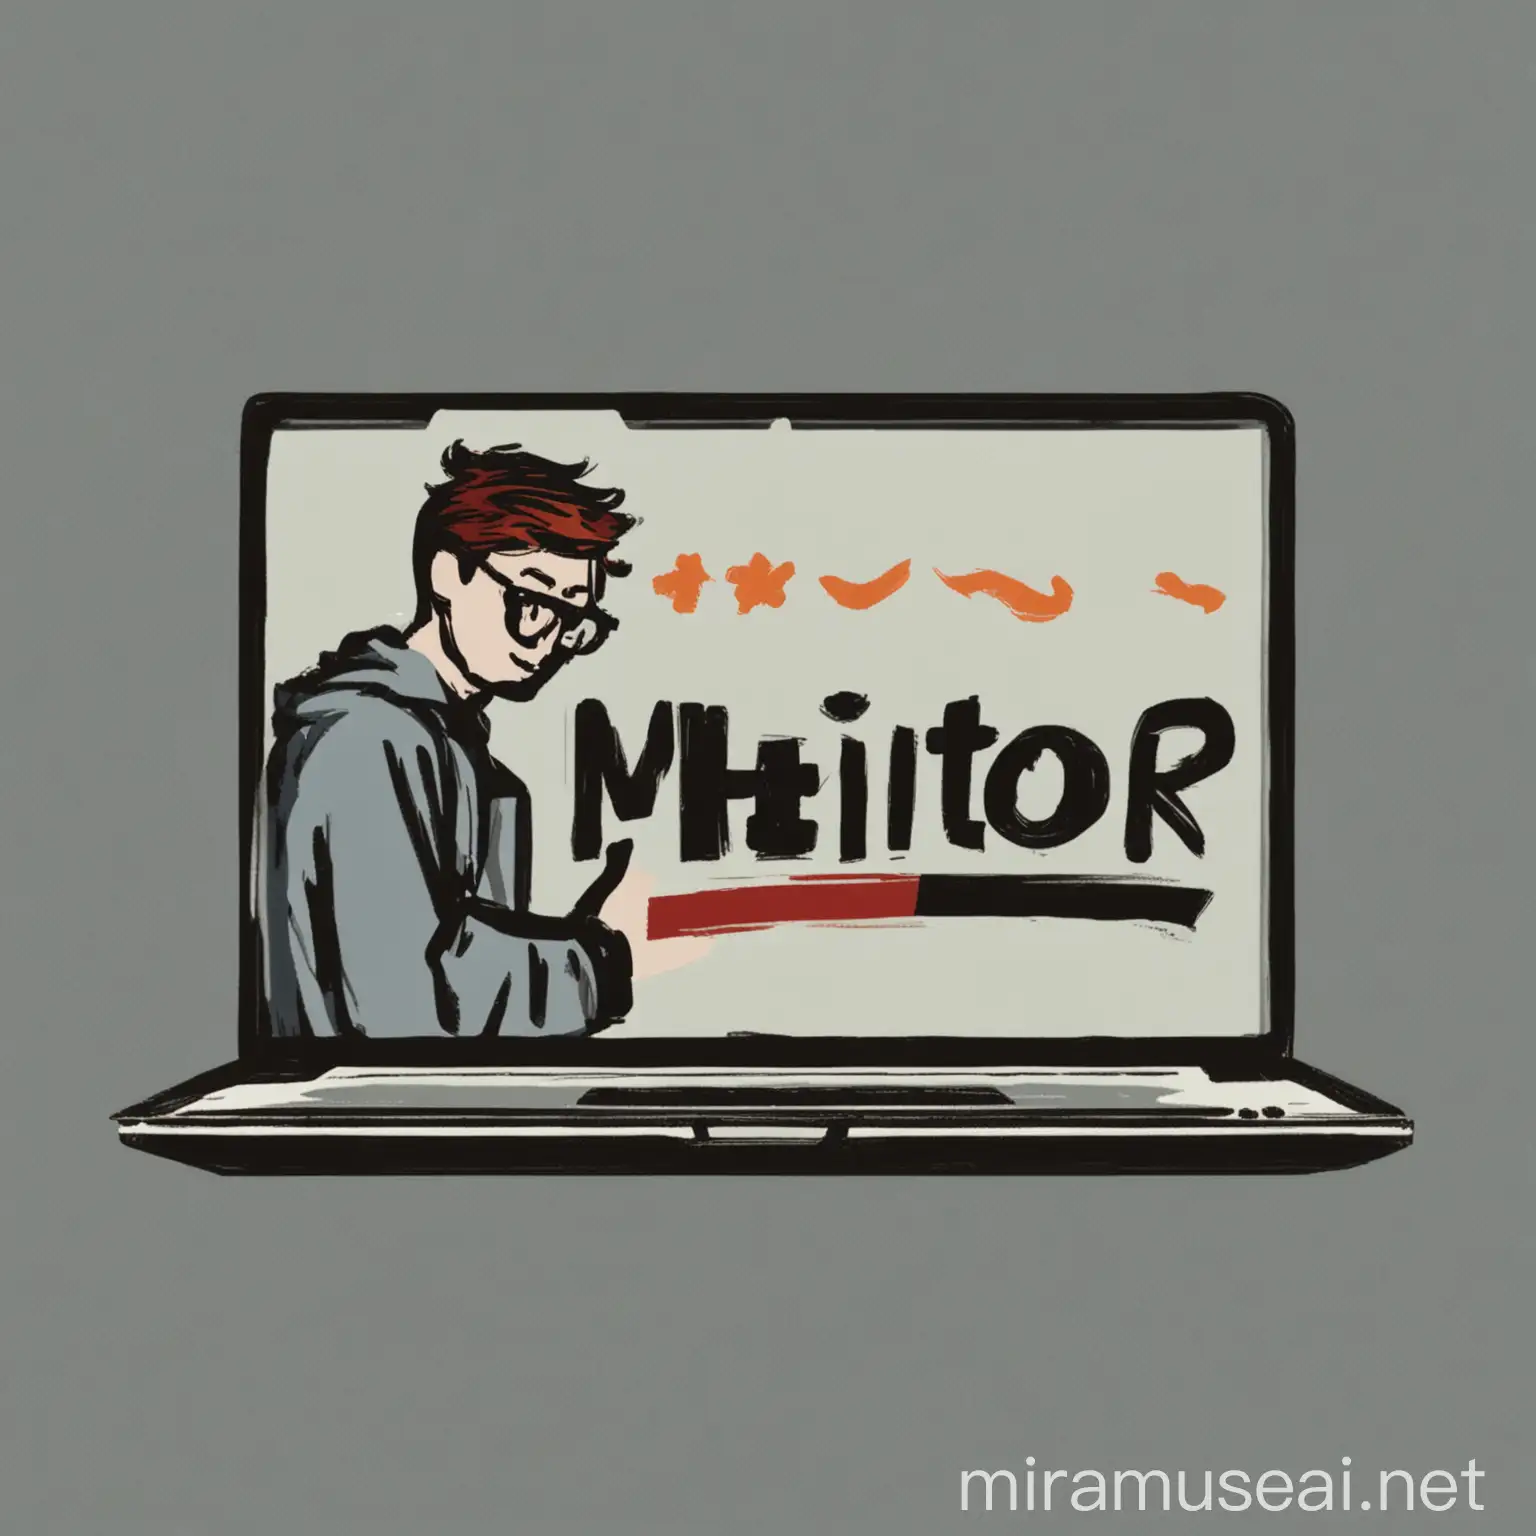 A logo of mentor online about IT that have a mentor guiding a student before a Laptop